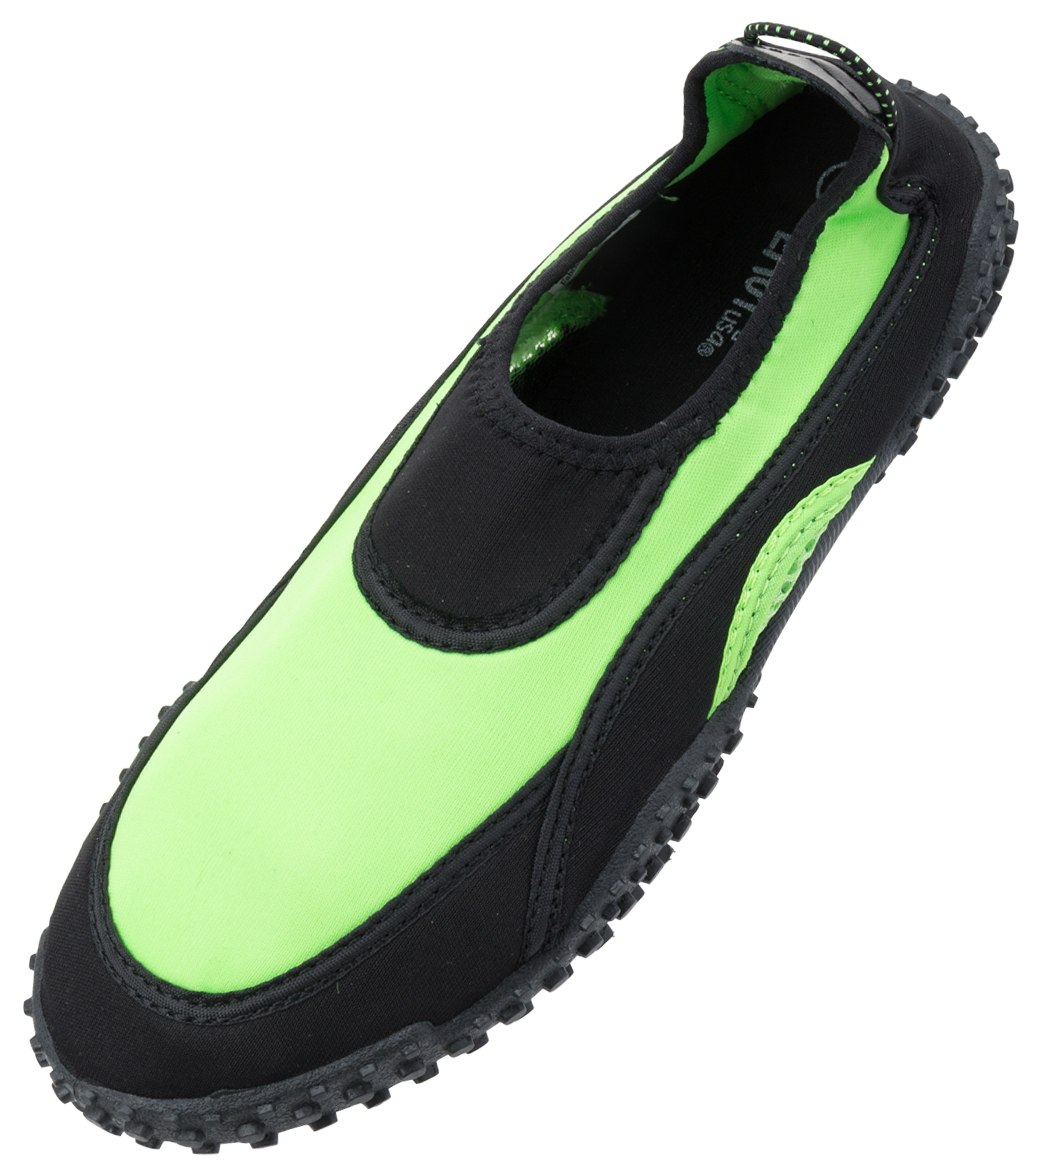 Easy Usa Women's Water Shoes - Black/Green 6 - Swimoutlet.com